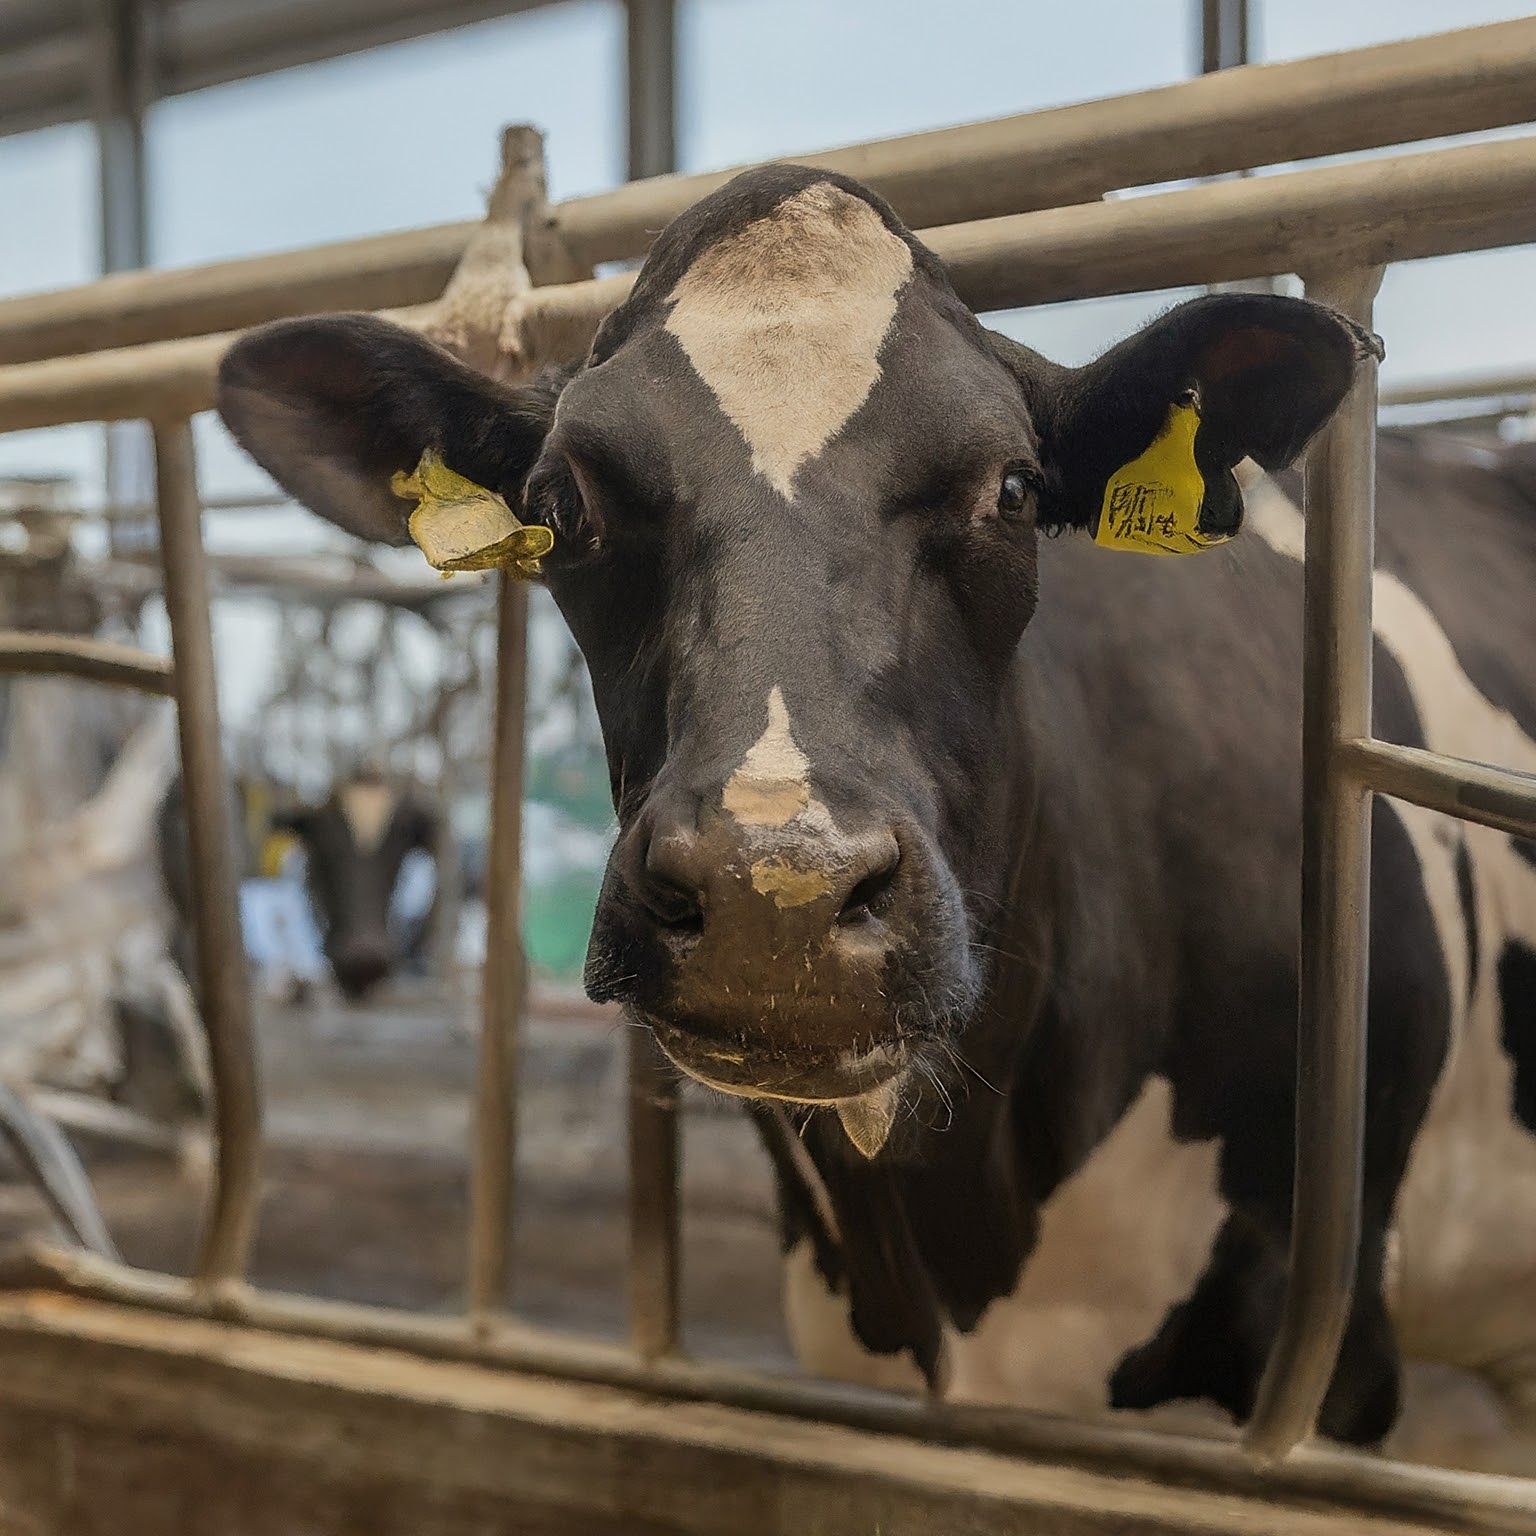 Bird Flu in Barns? Feds Fund Dairy Cow Testing (But Should You Be Worried?)